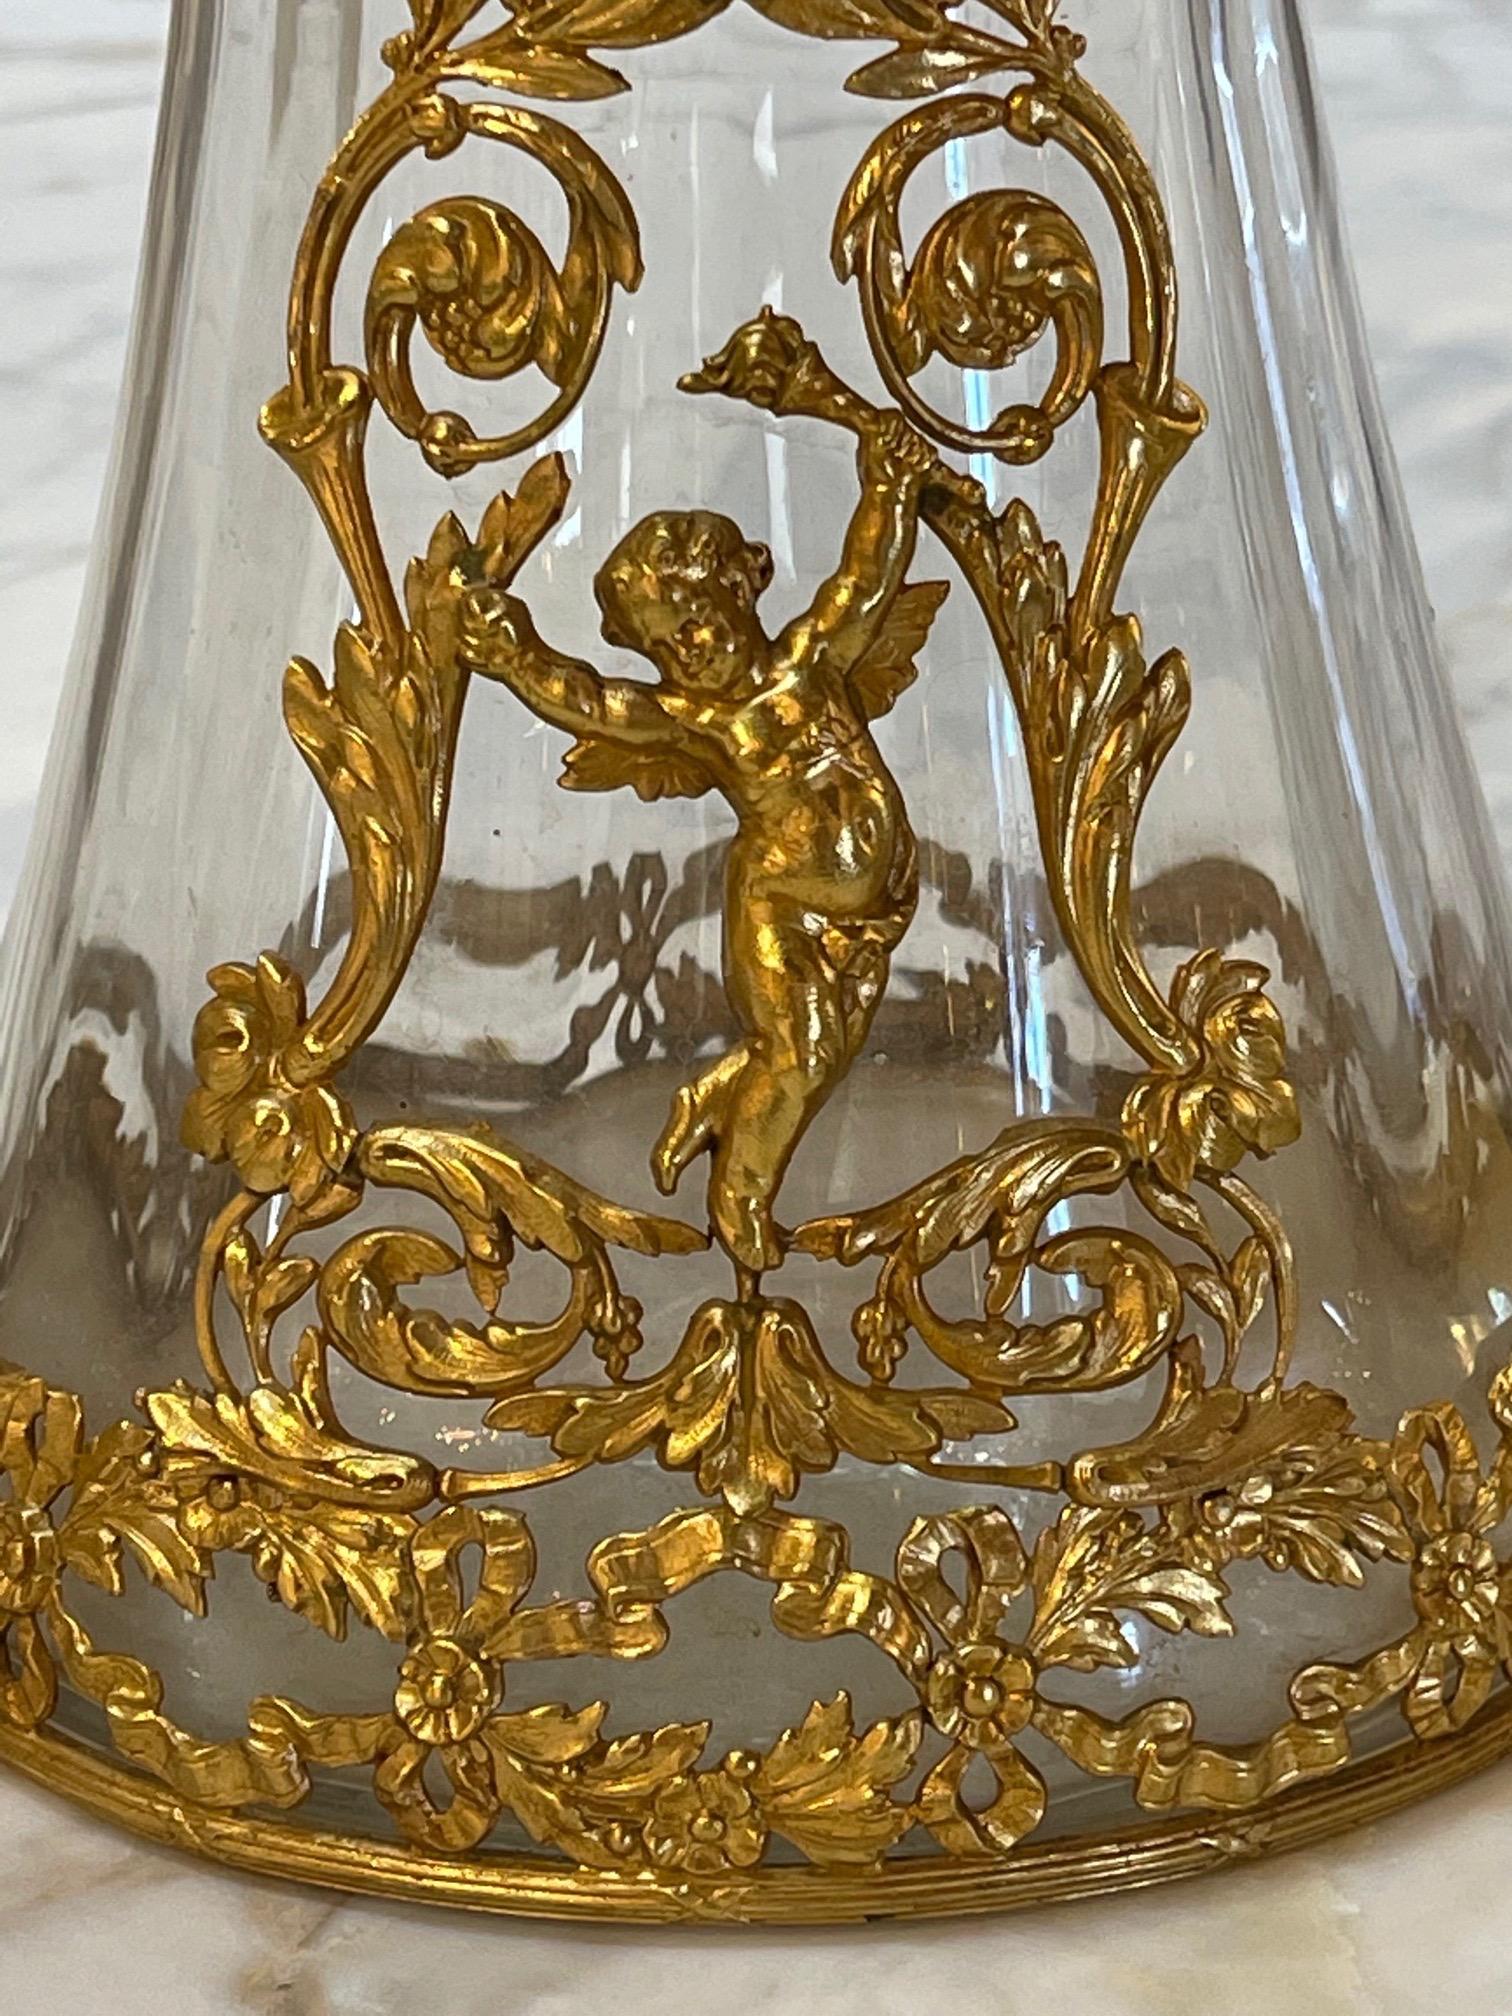 Exquisite pair of 19th century glass and Dore bronze vases. Gorgeous images of a cherub and floral images. Superb!!